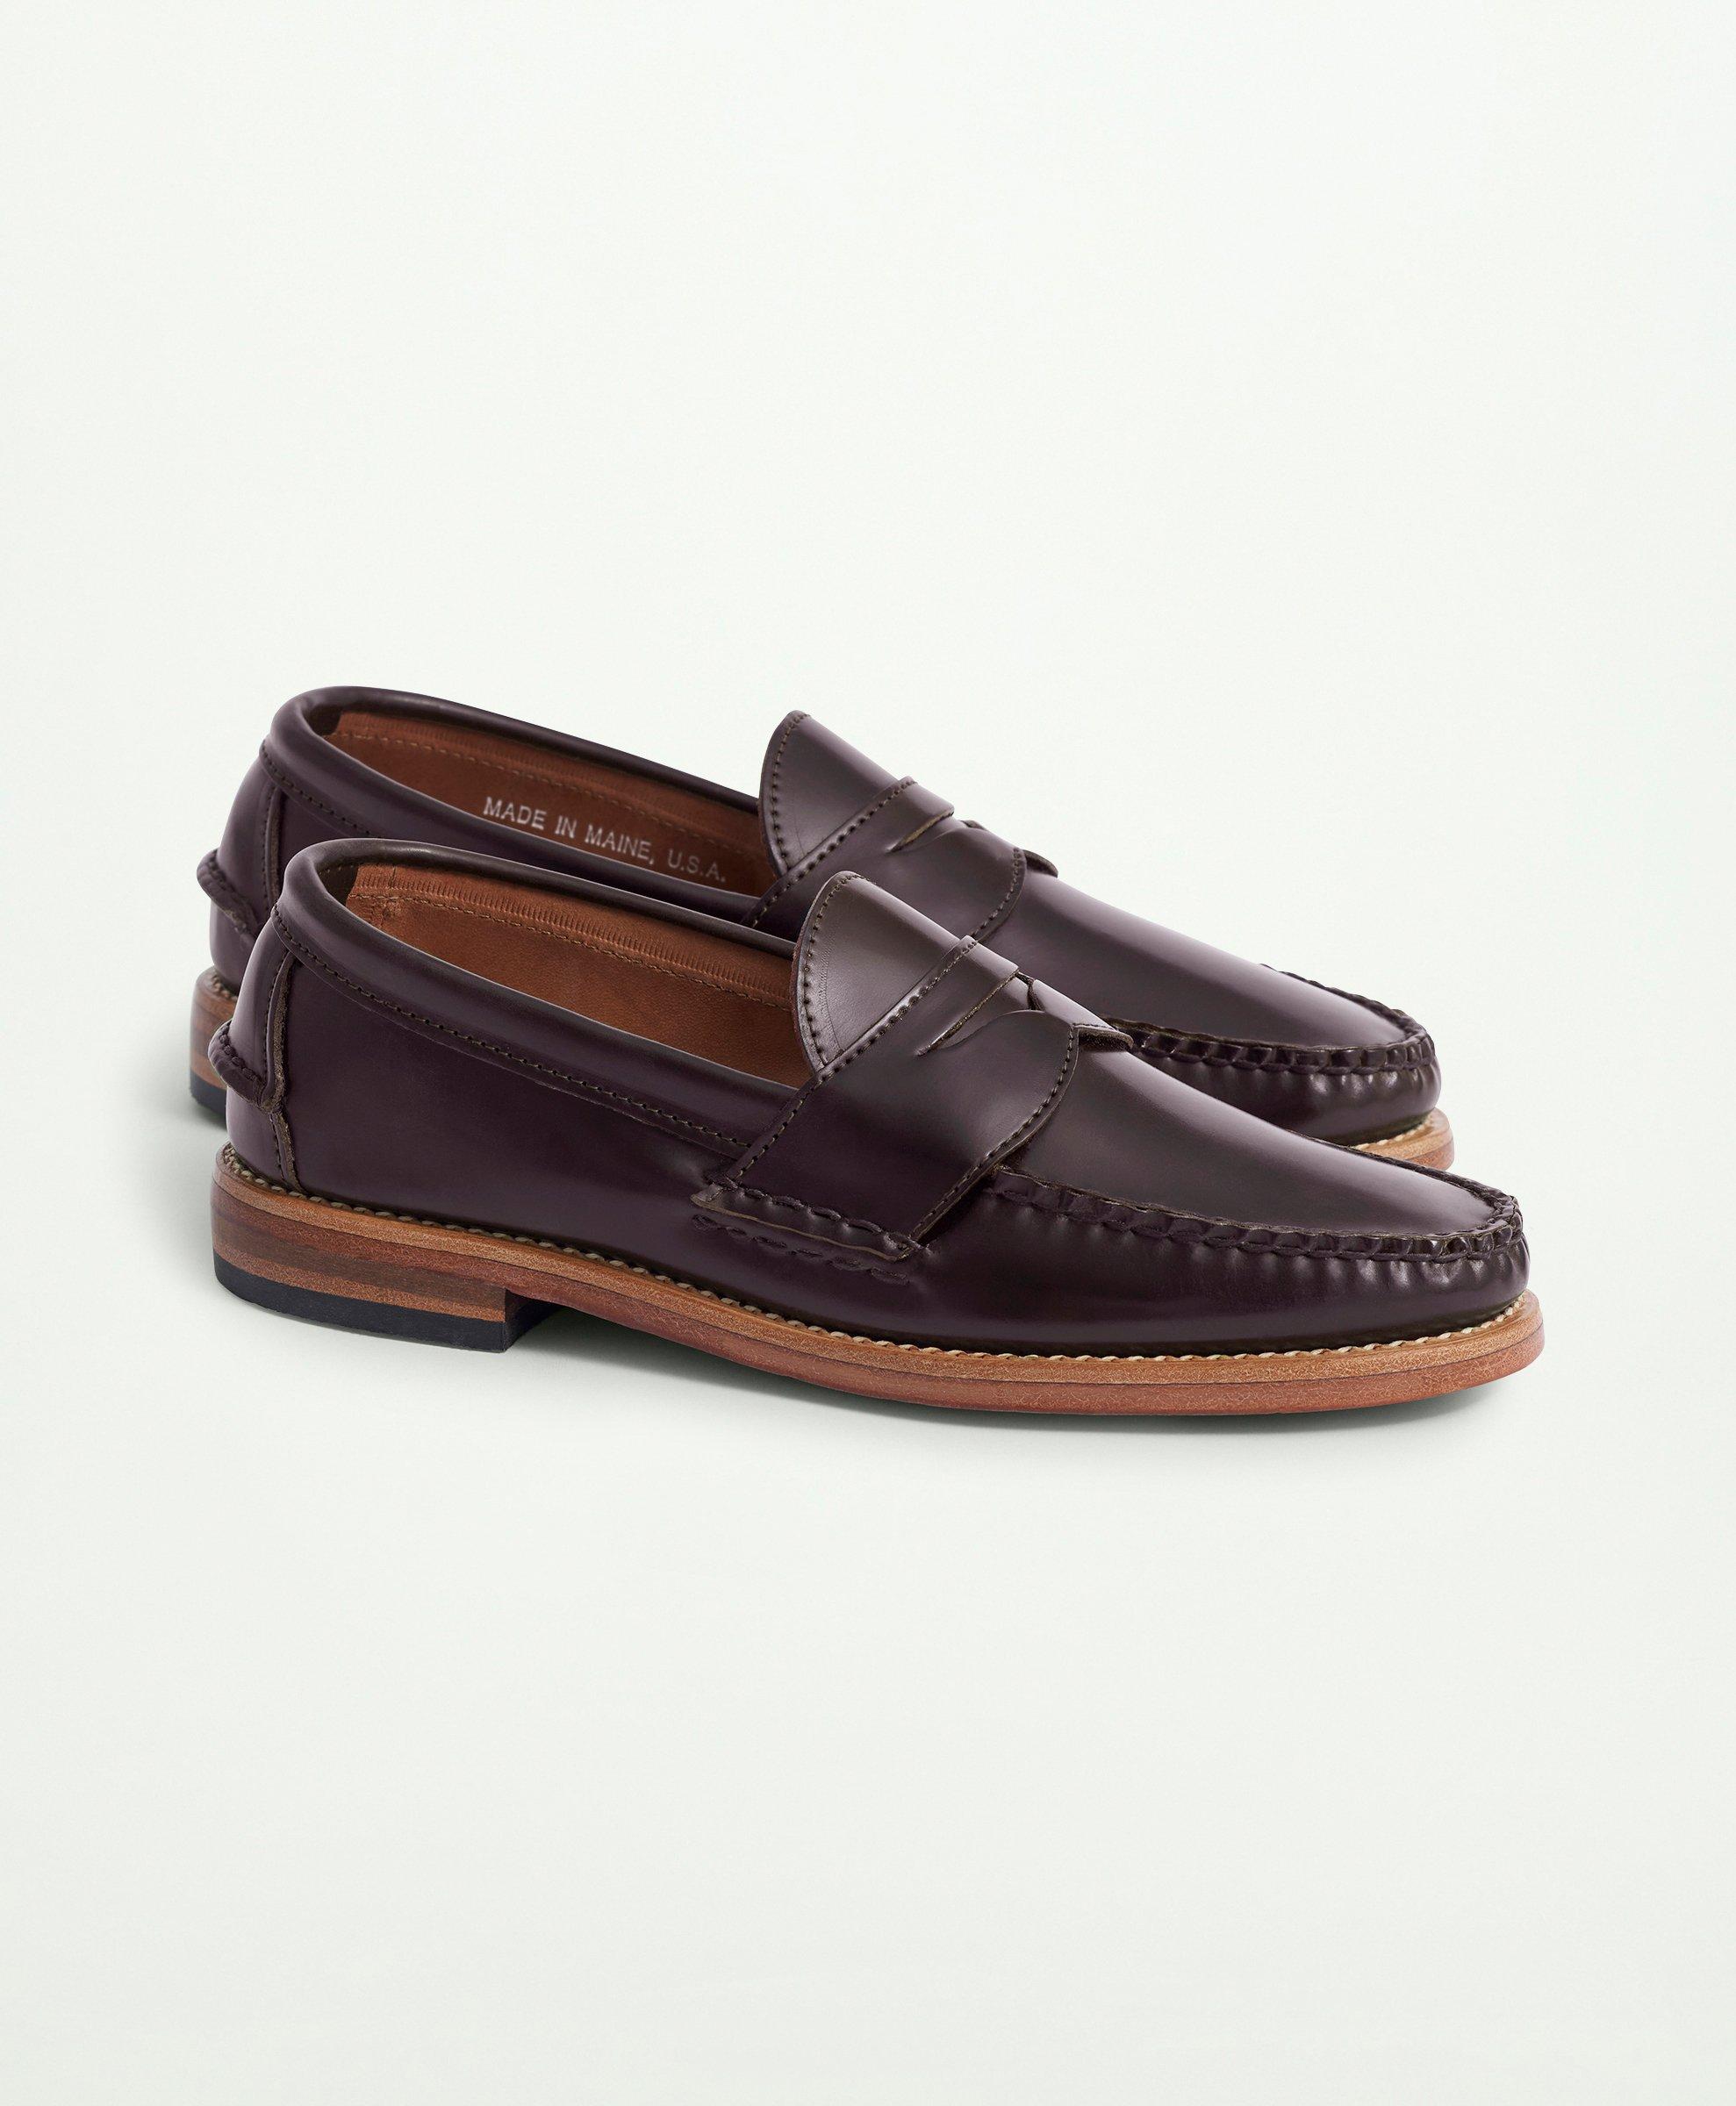 Brooks Brothers Rancourt Cordovan Pinch Penny Loafer | Burgundy | Size 11 D